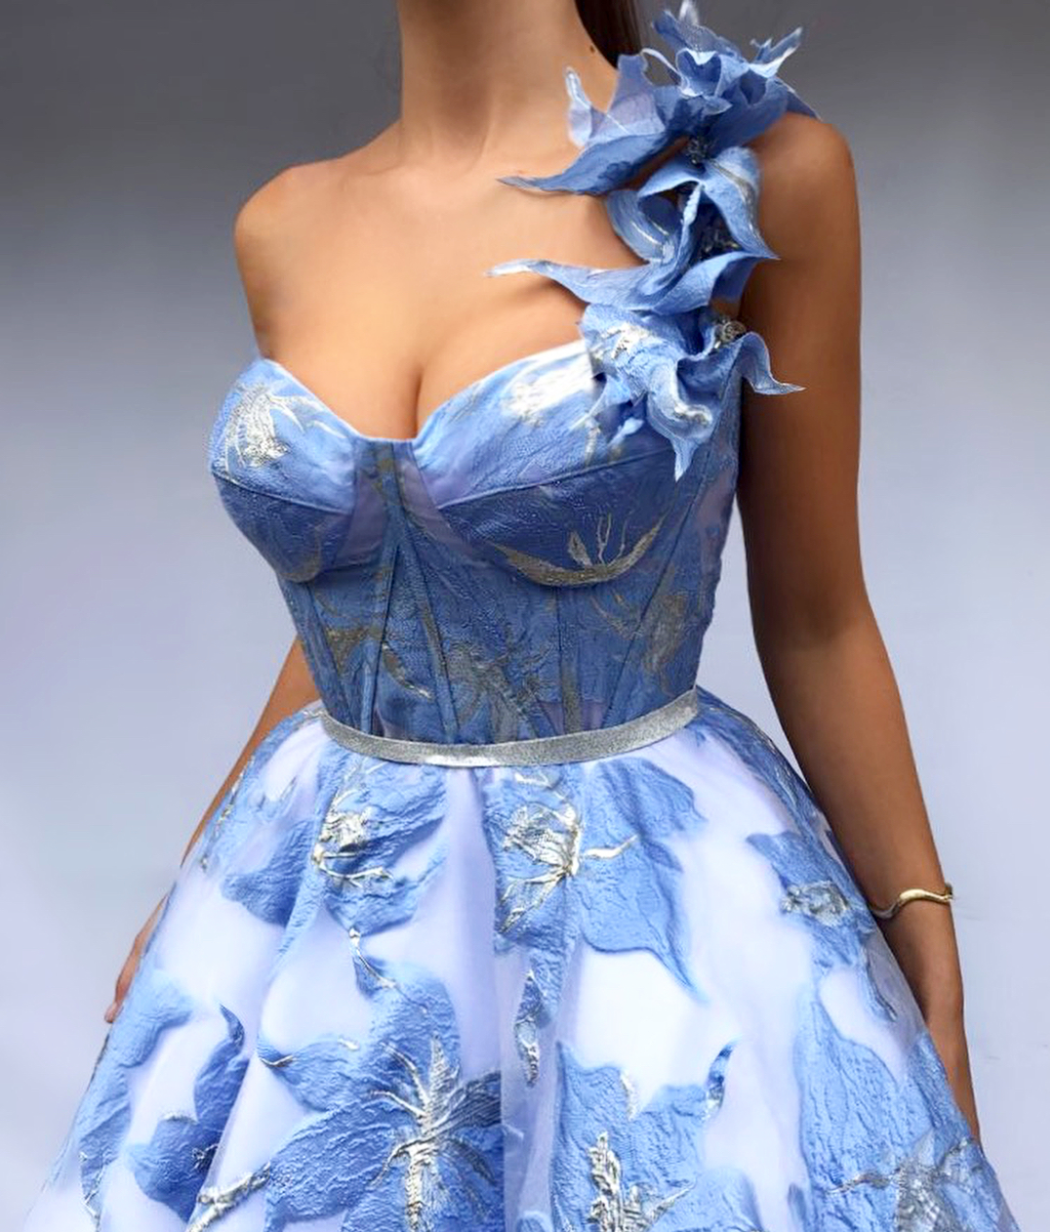 Blue A-Line dress with one strap, embroidery and printed flowers